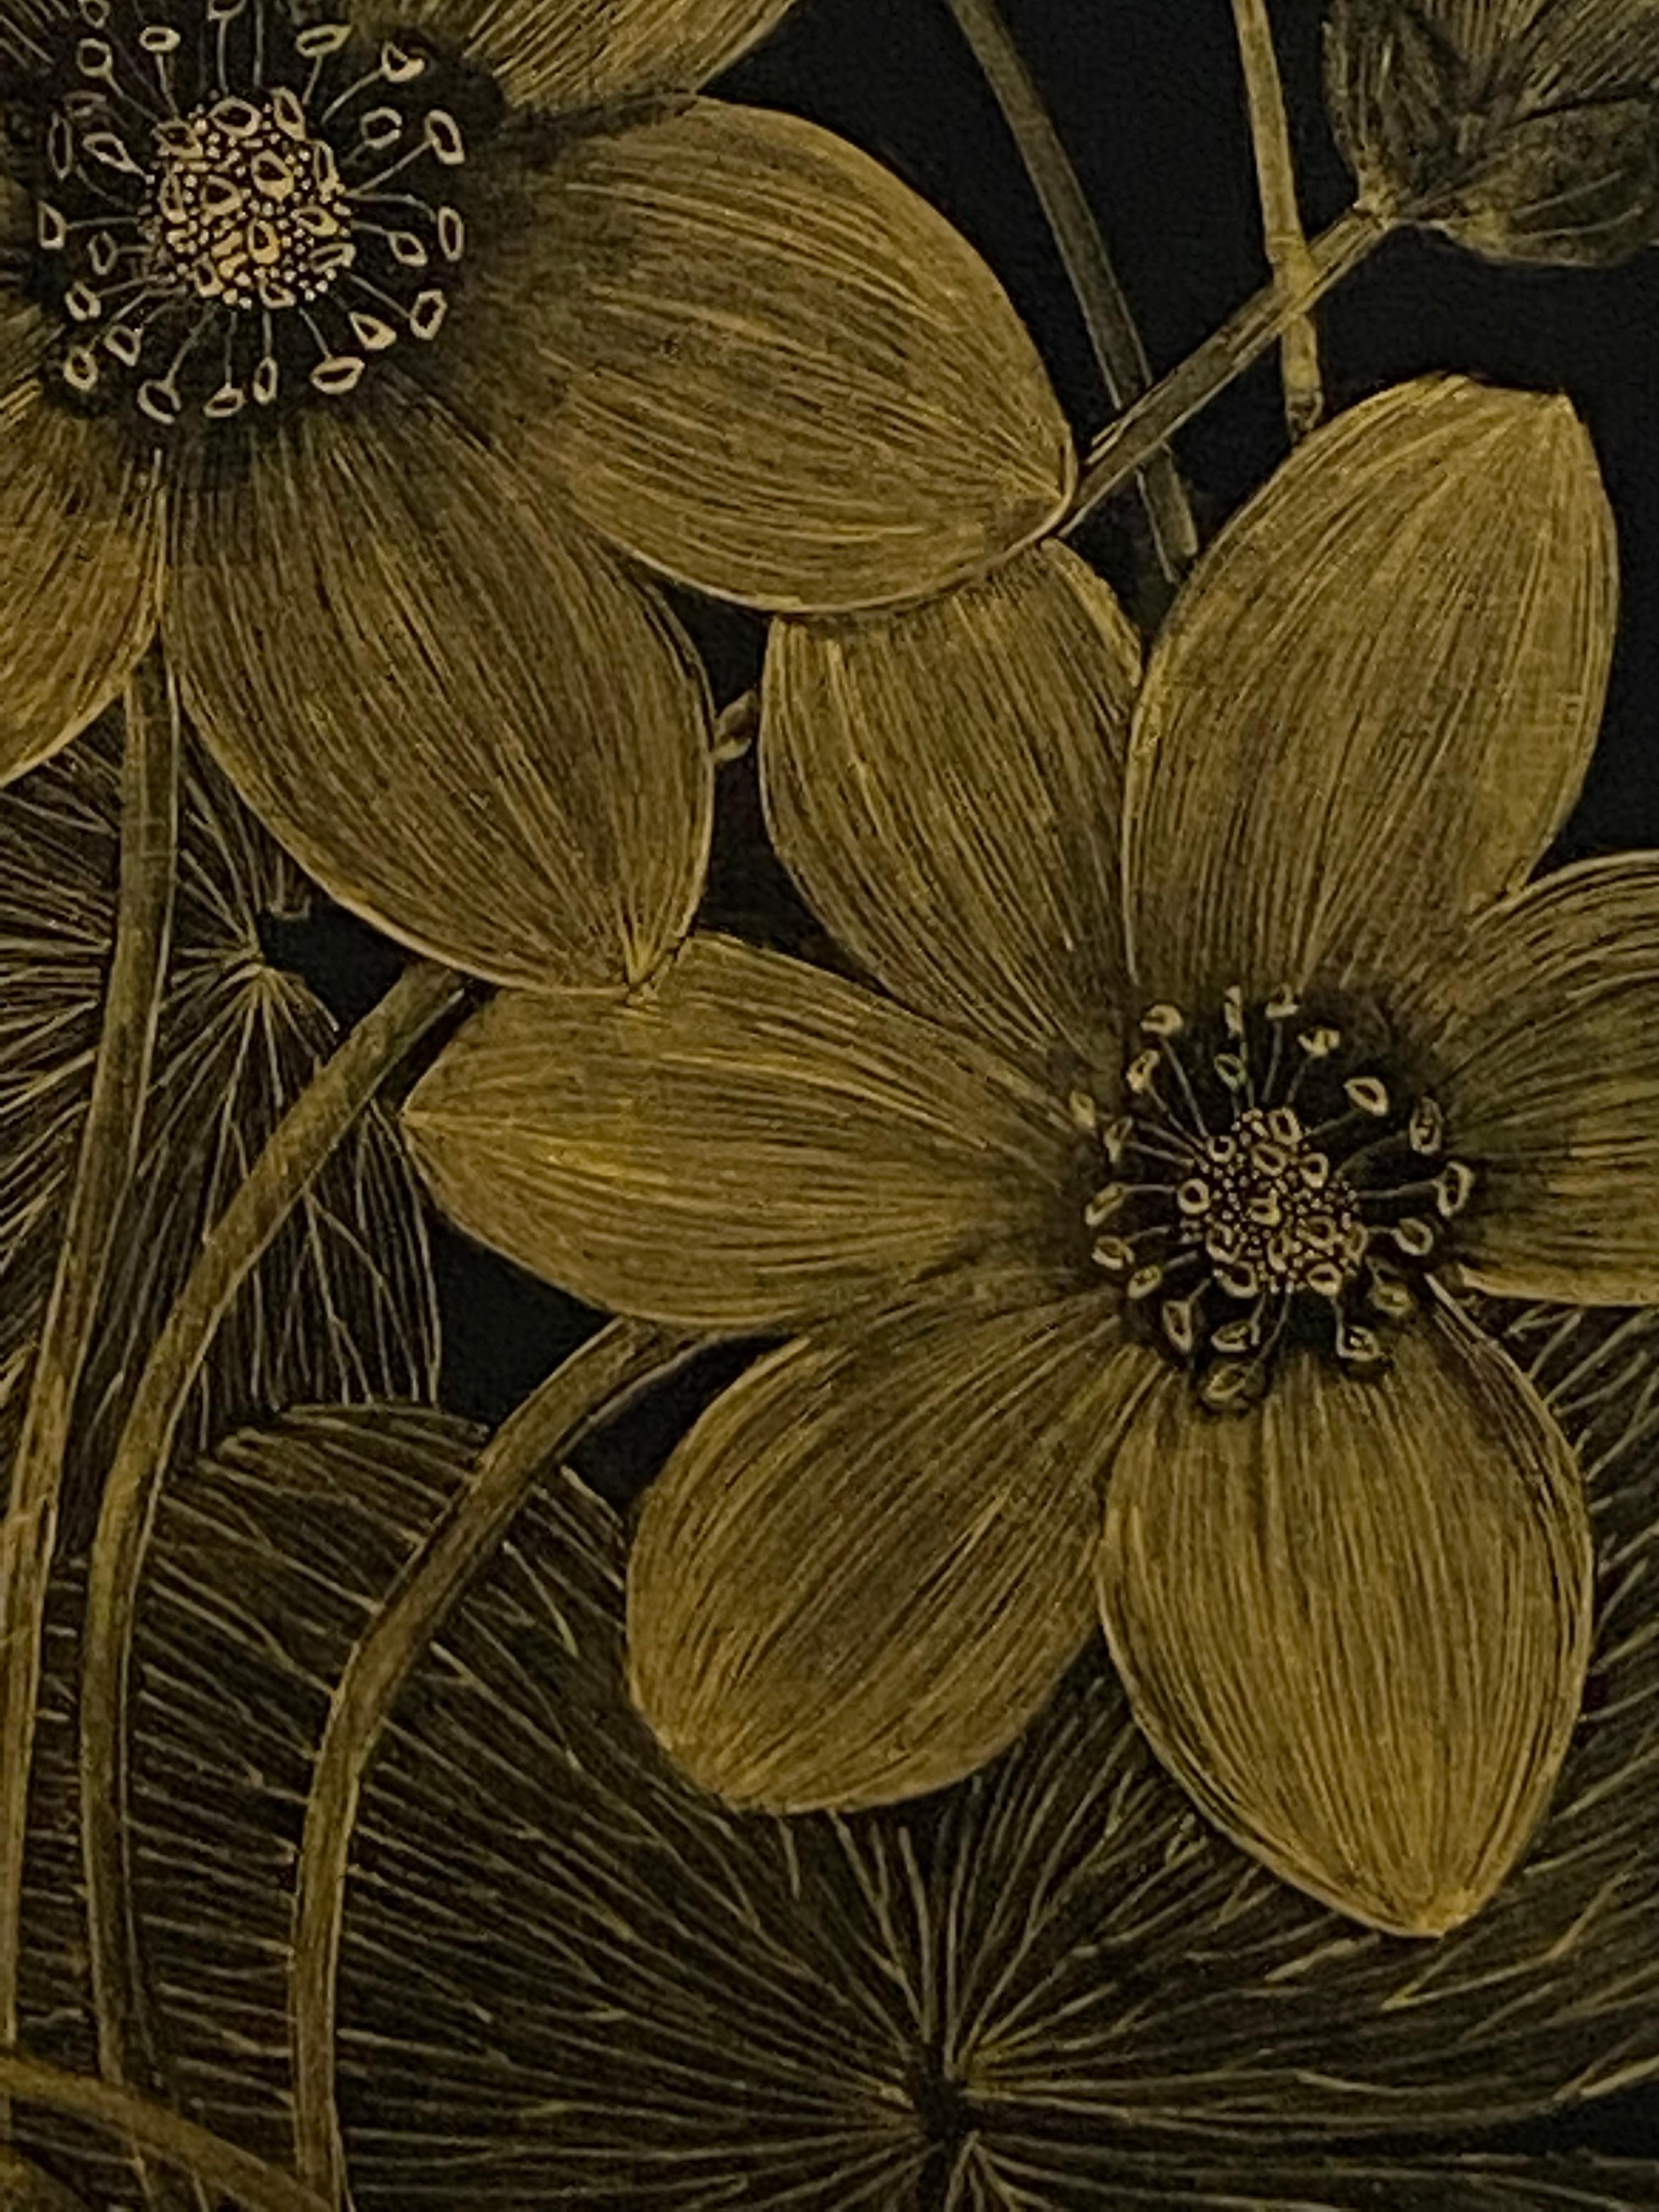 Anemone One, Botanical Painting, Gold Flowers, Leaves, Stem, Buds on Black Panel For Sale 2